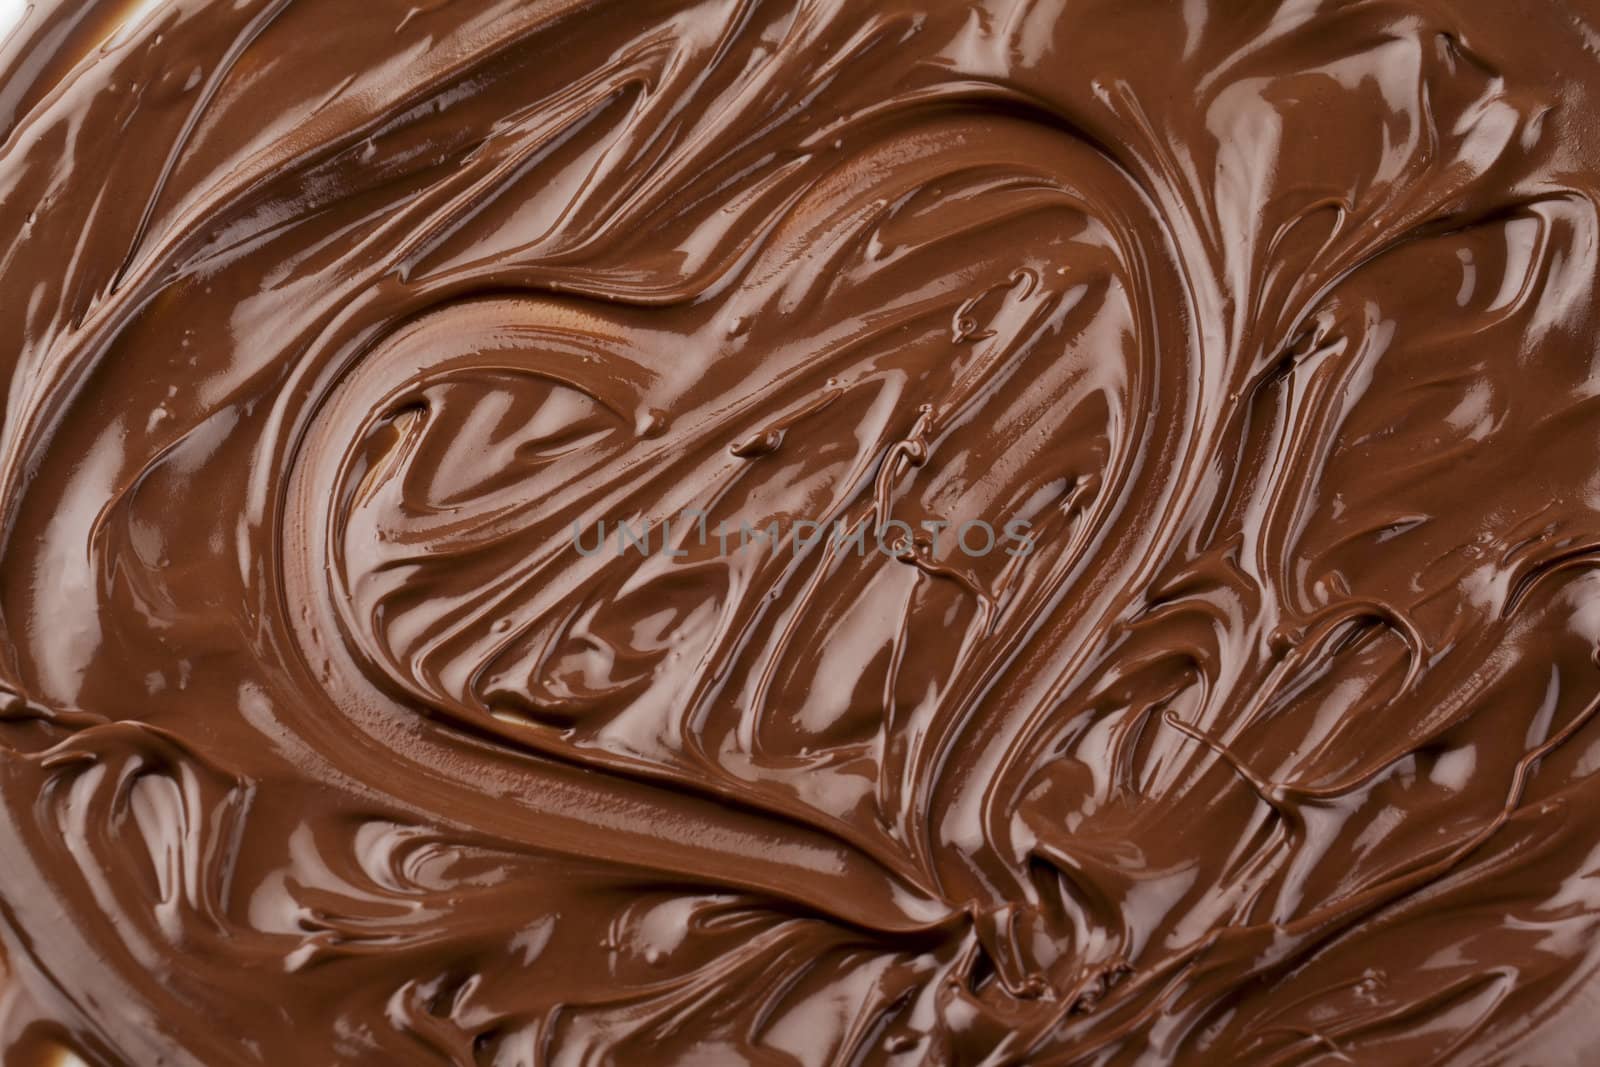 heart shape made up of melted chocolate by kozzi